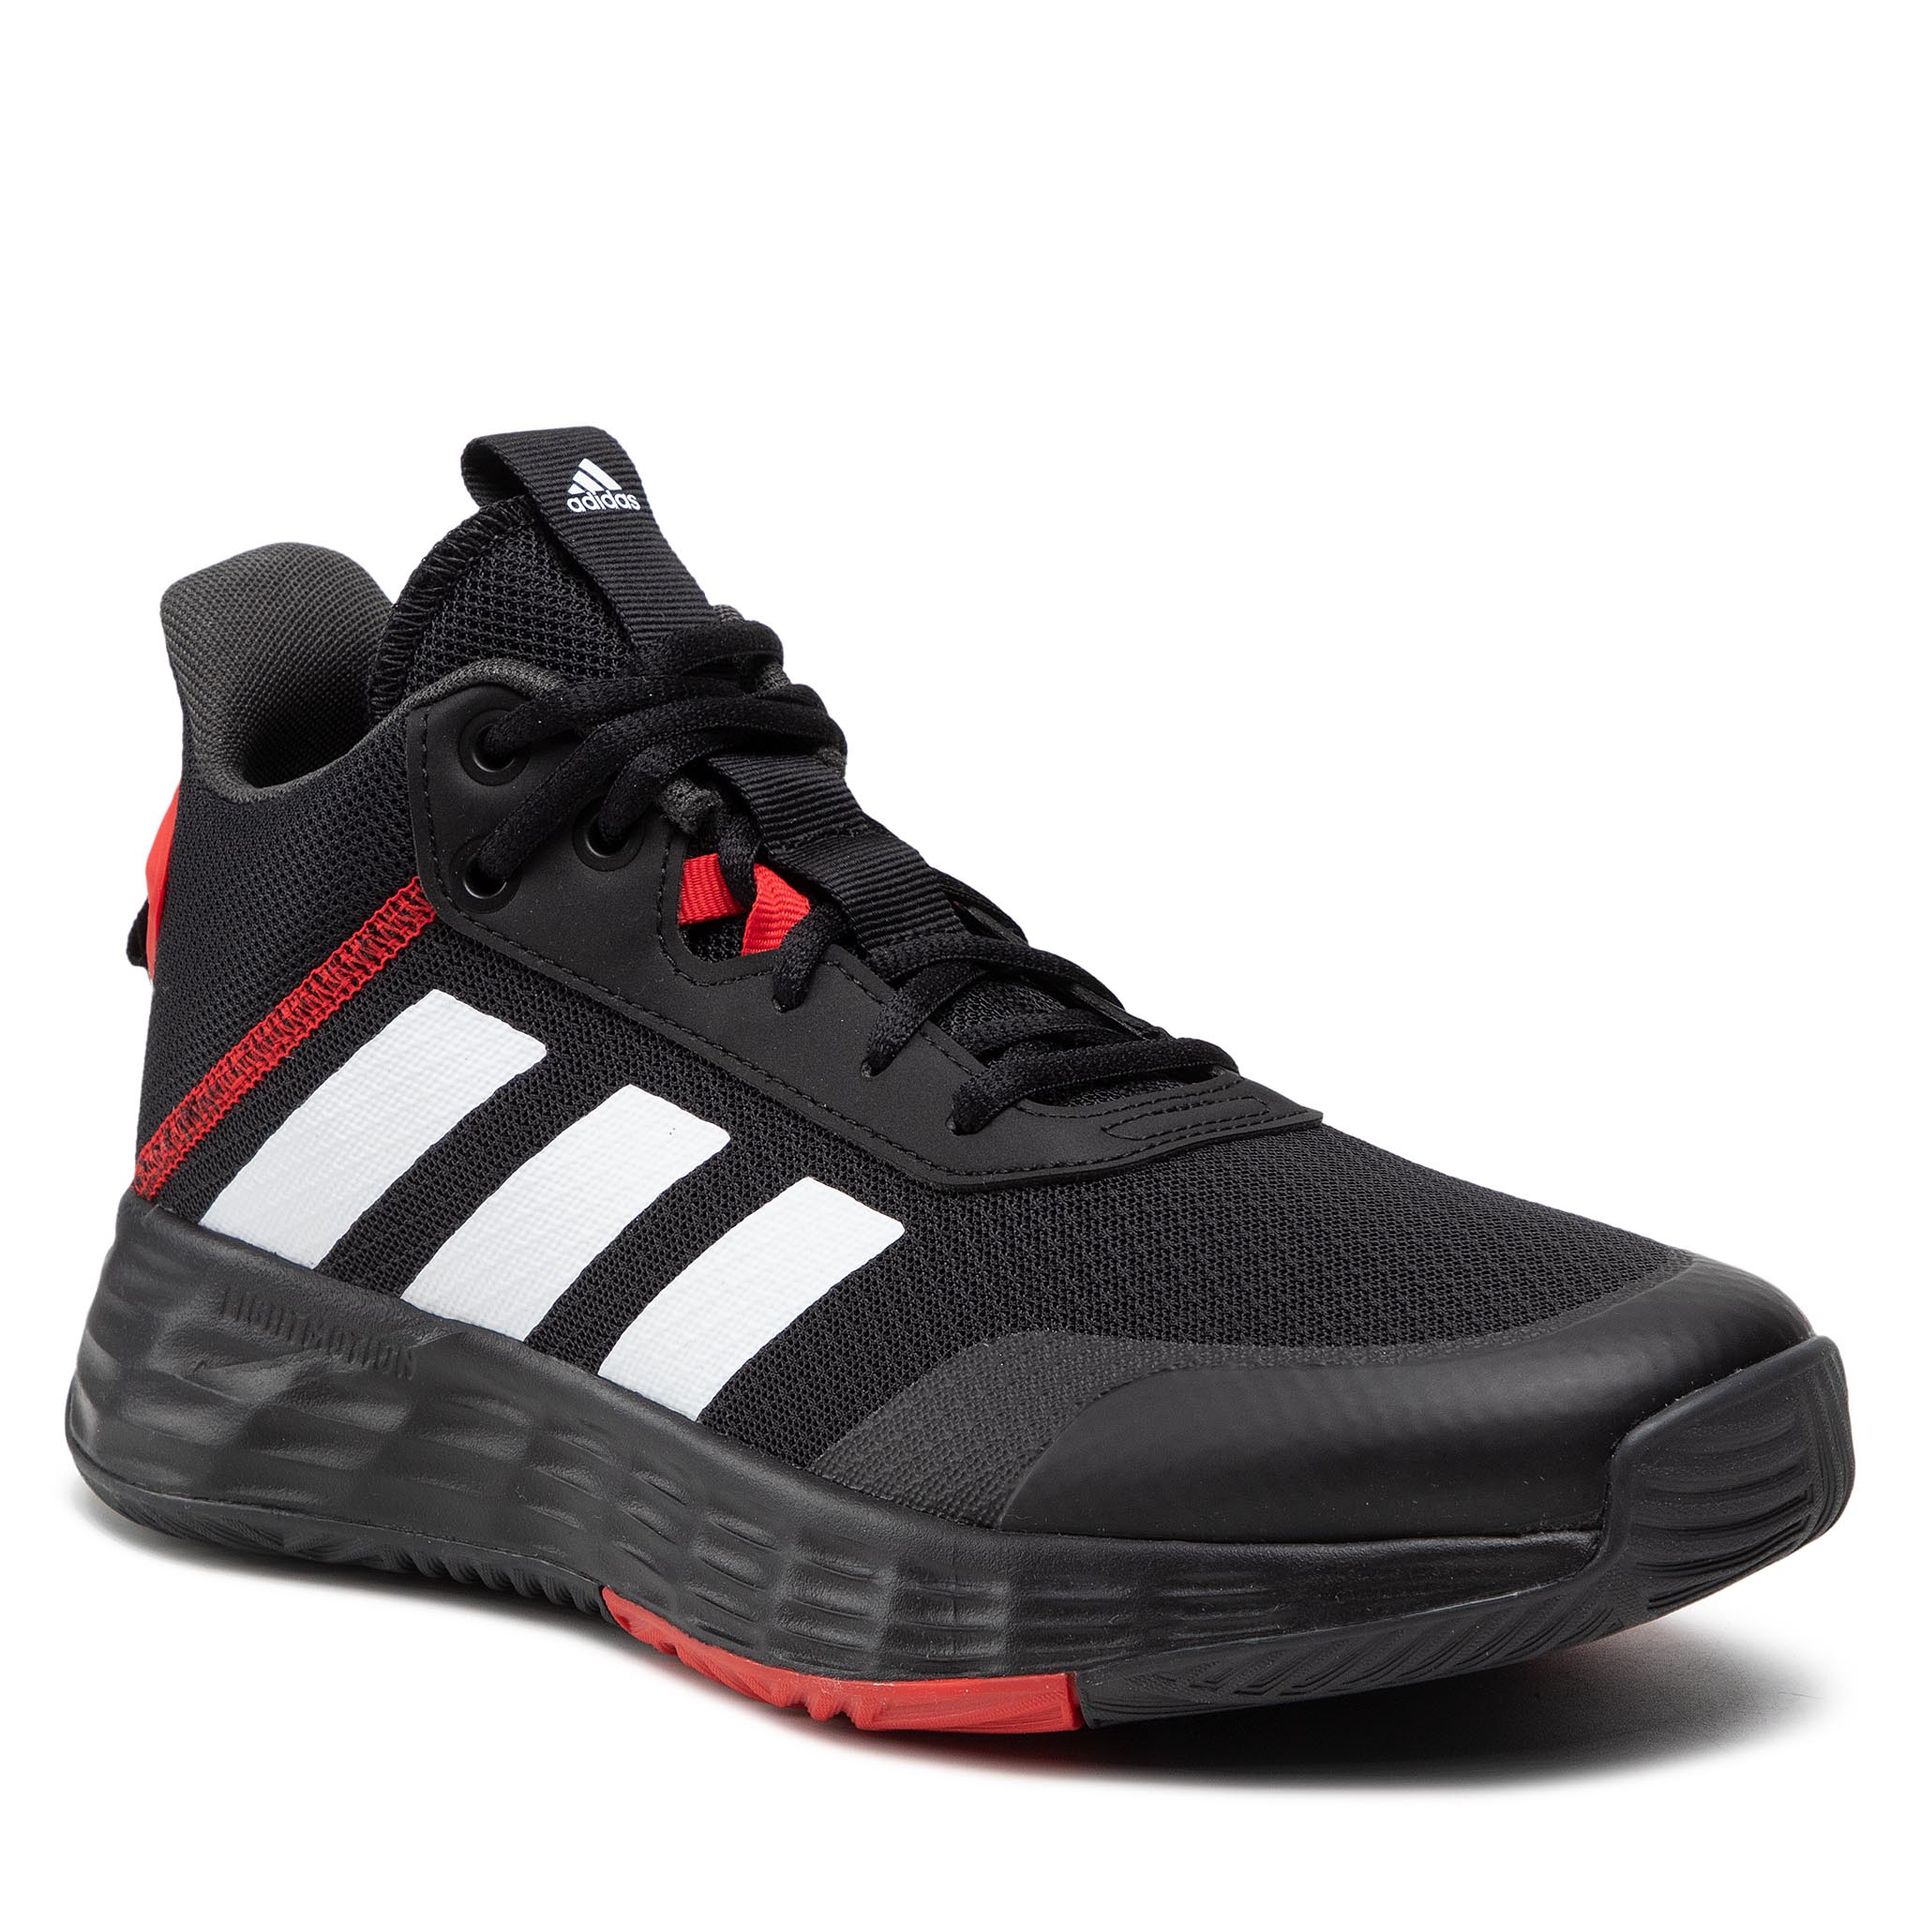 Adidas Buty Ownthegame 2.0 H00471 Core Black/Cloud White/Carbon